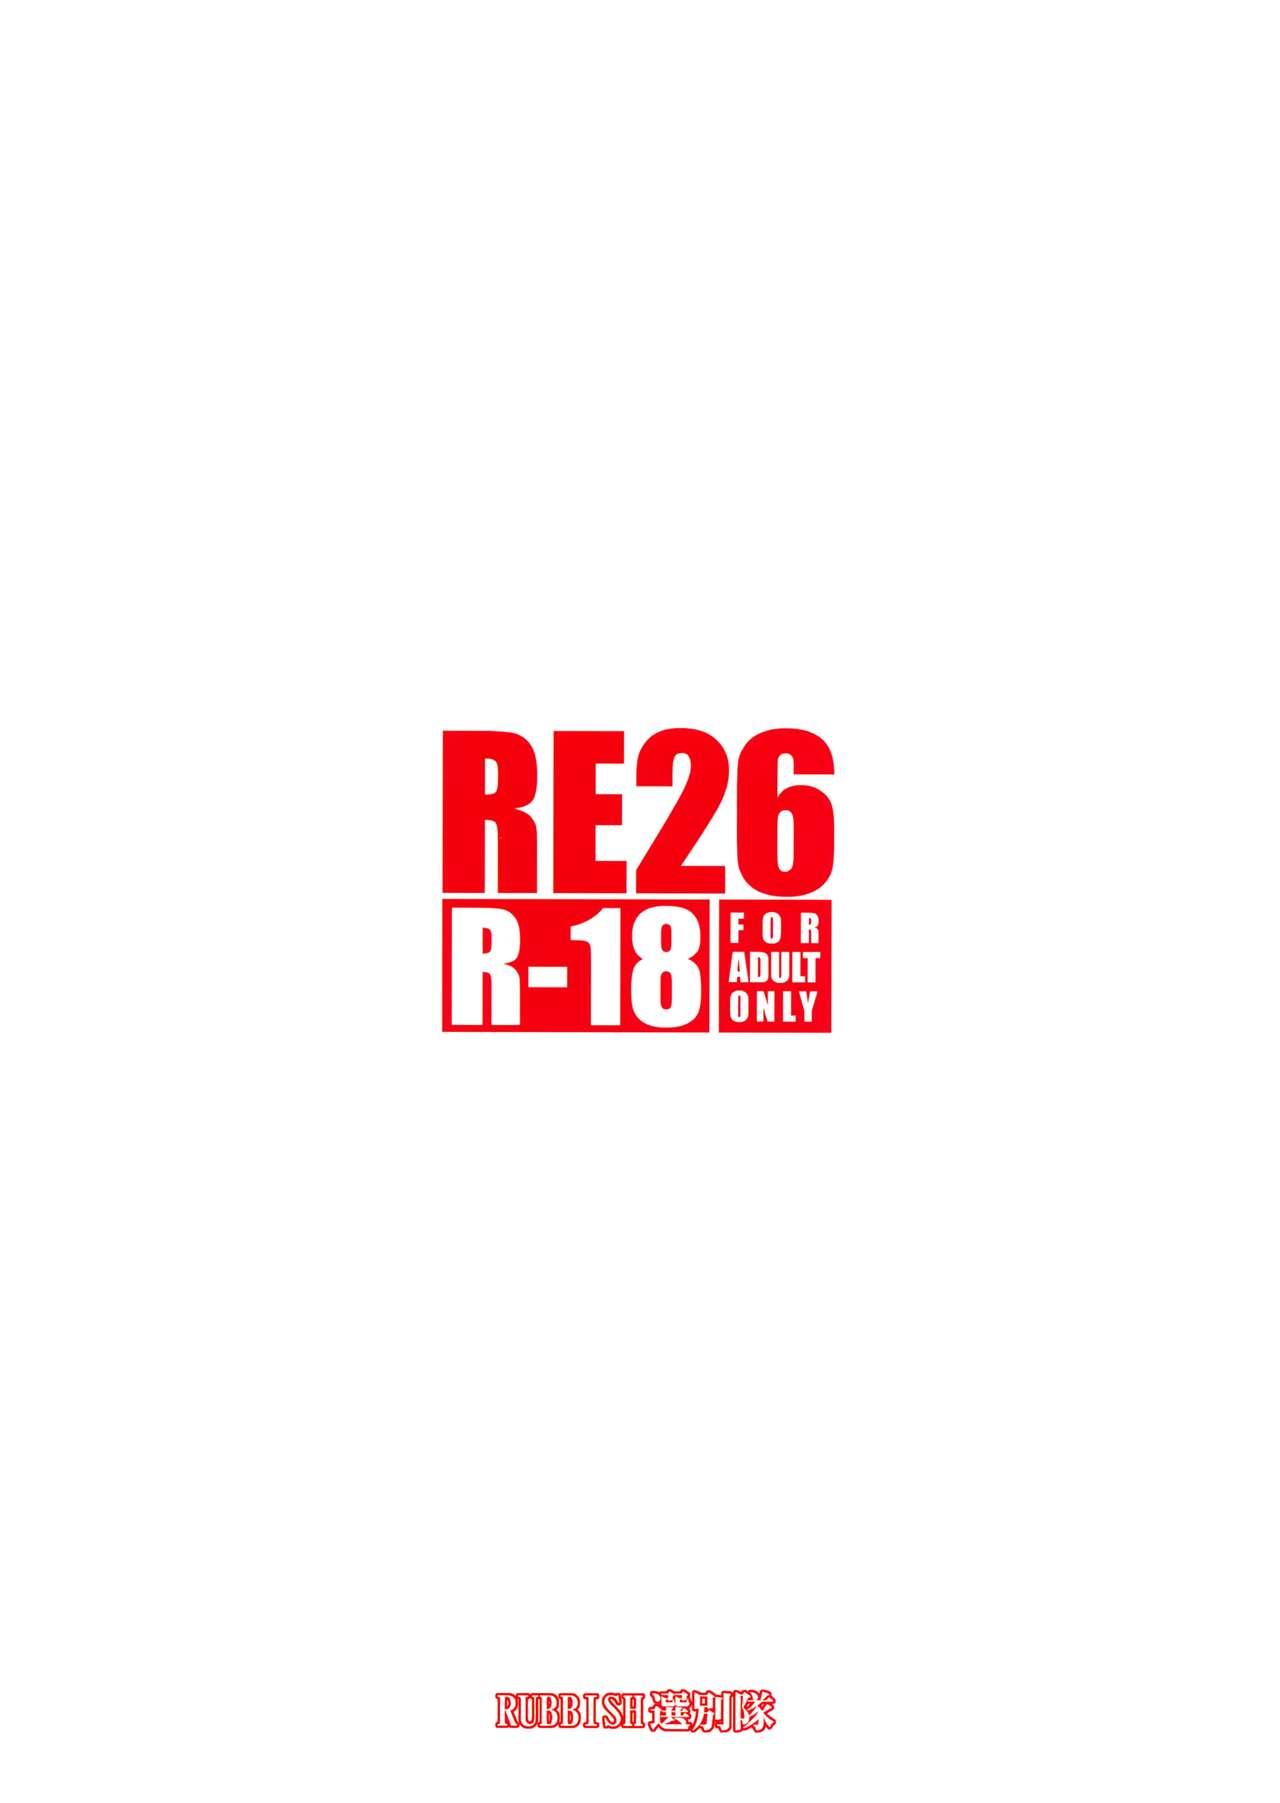 RE26 33